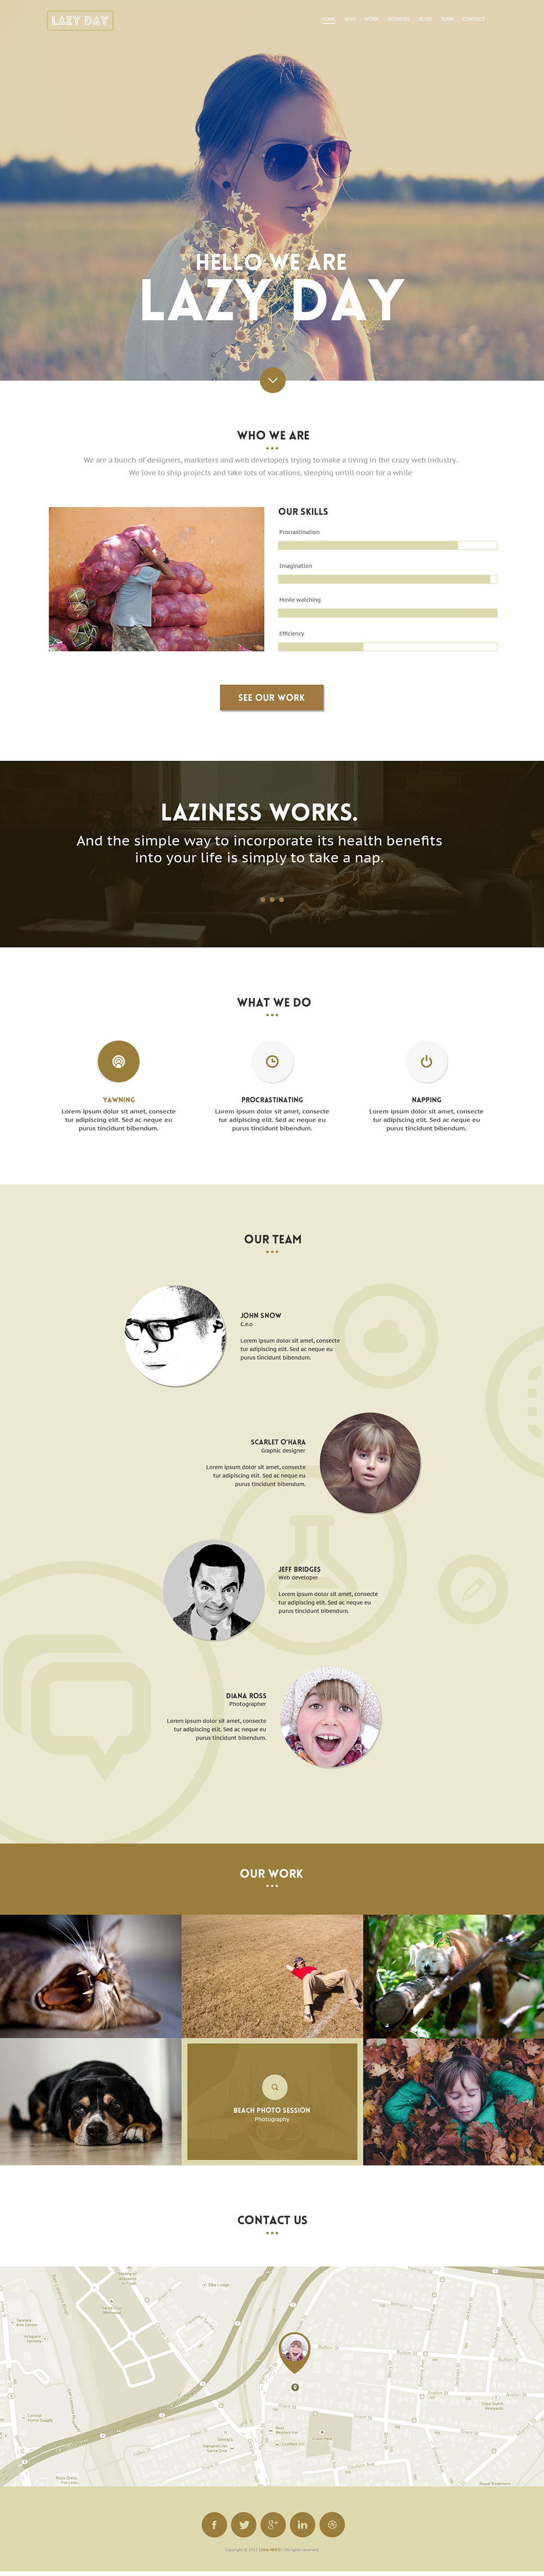 Lazy day - One Page PSD Template